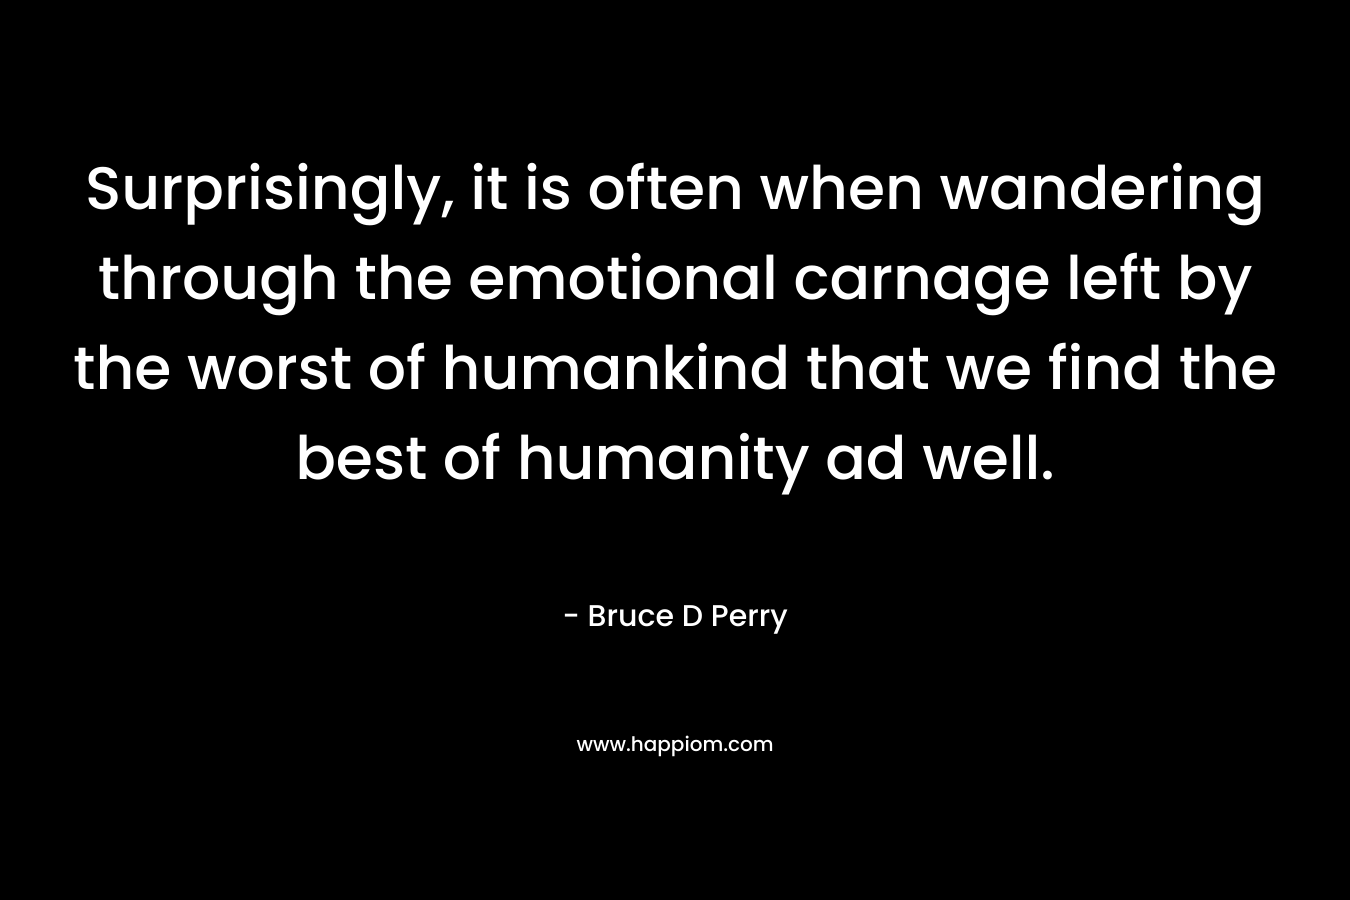 Surprisingly, it is often when wandering through the emotional carnage left by the worst of humankind that we find the best of humanity ad well. – Bruce D Perry